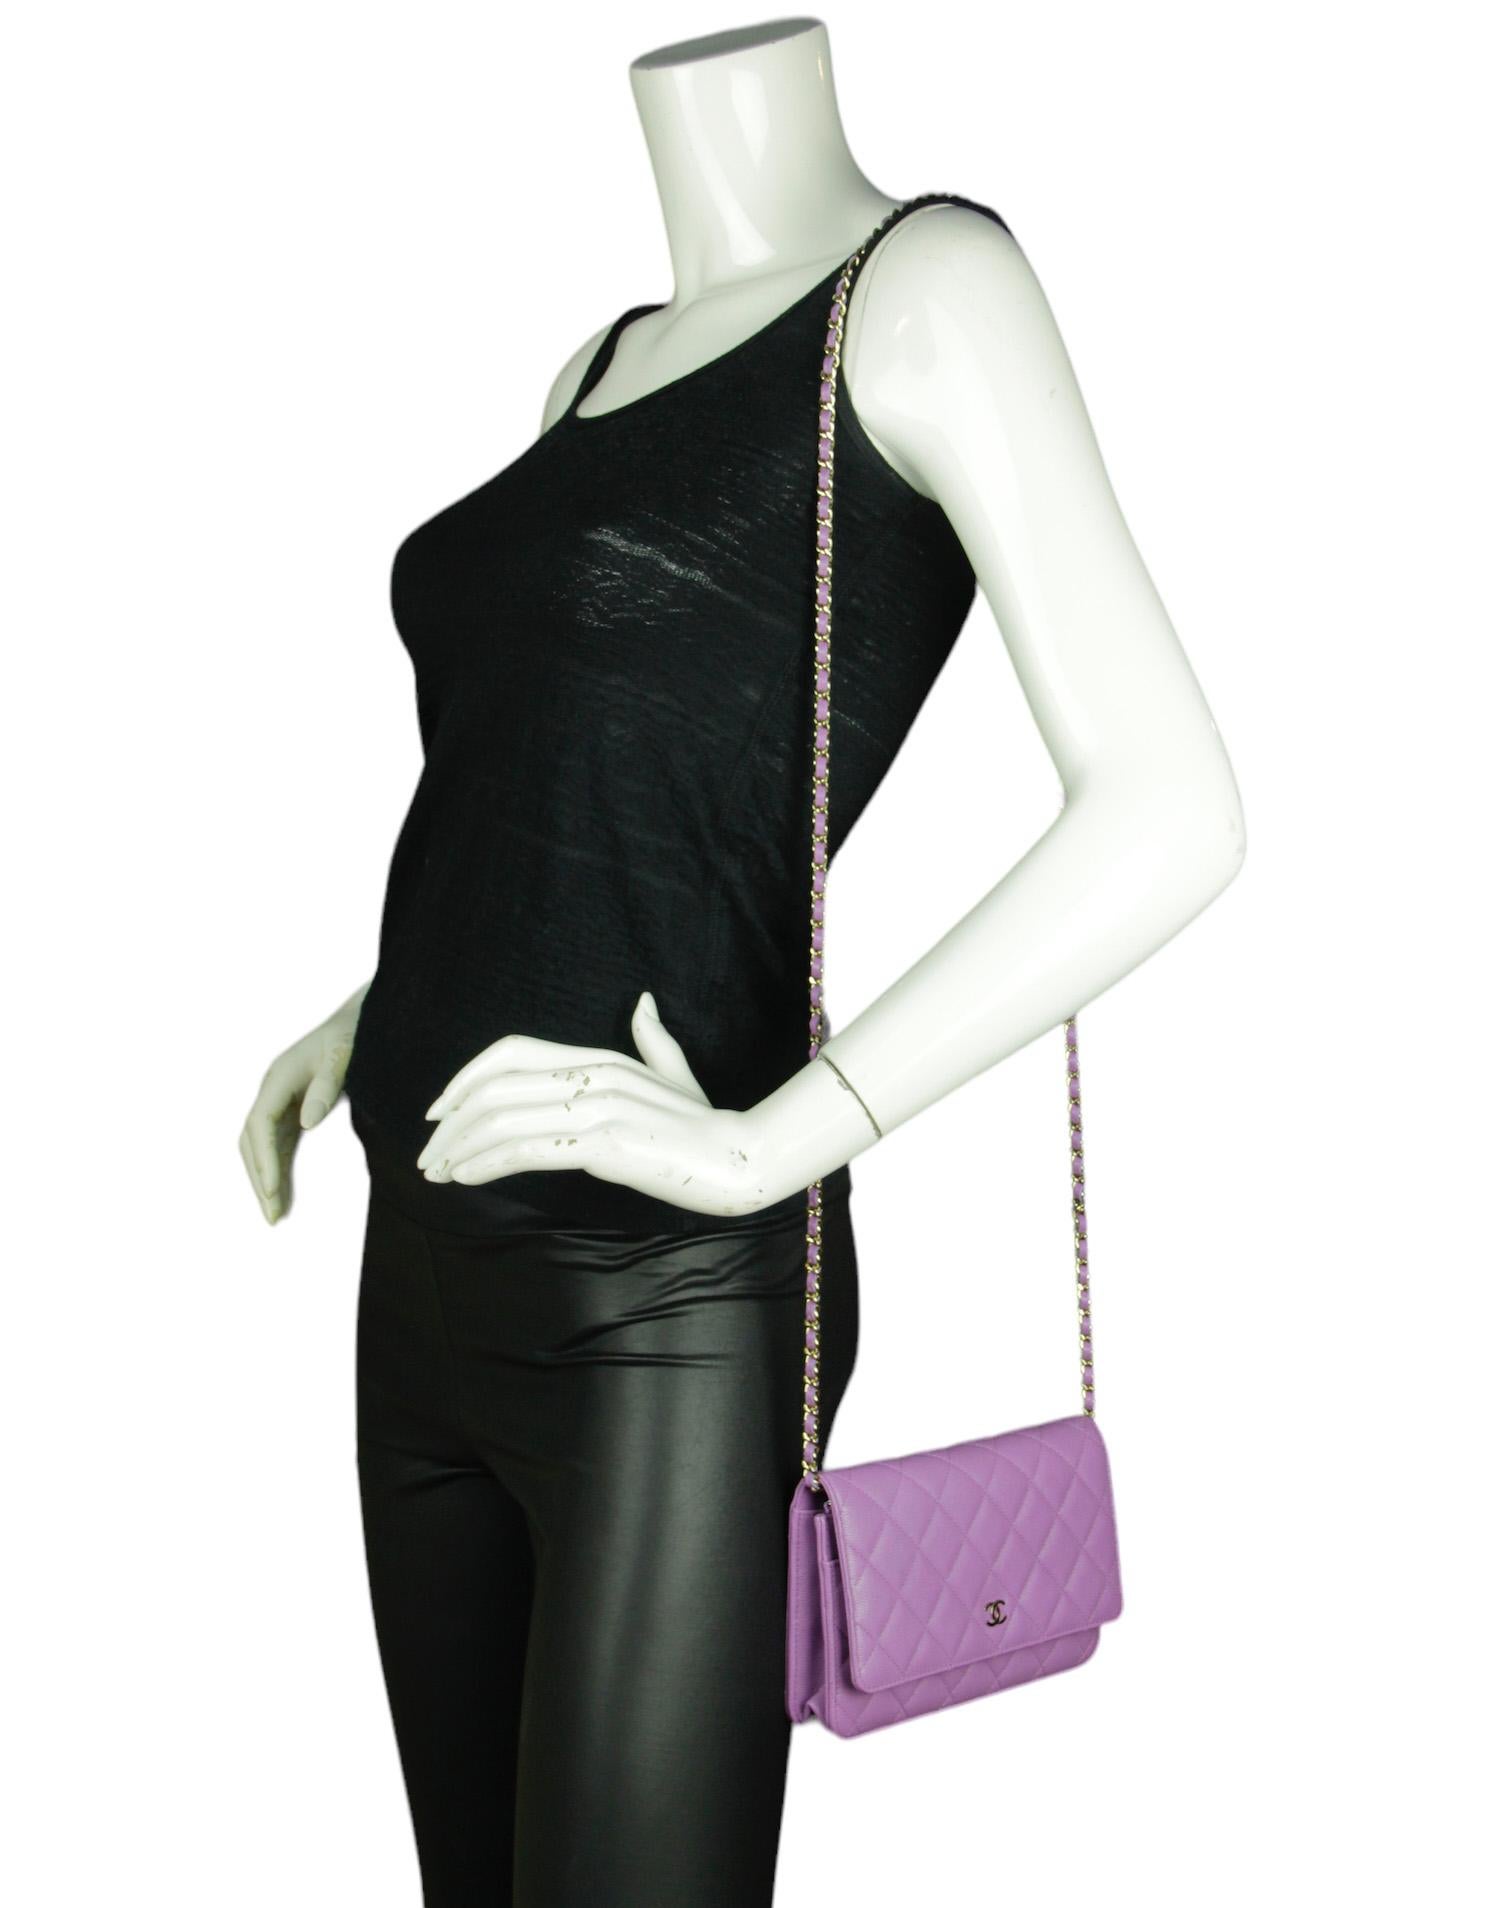 Bag. Chain can be tucked inside bag to also be worn as a clutch. 
Made In: France
Year of Production: 2022
Color: Viole purple
Hardware: Light goldtone
Materials: Caviar leather
Lining: Purple leather and grosgrain
Closure/Opening: Flap top with